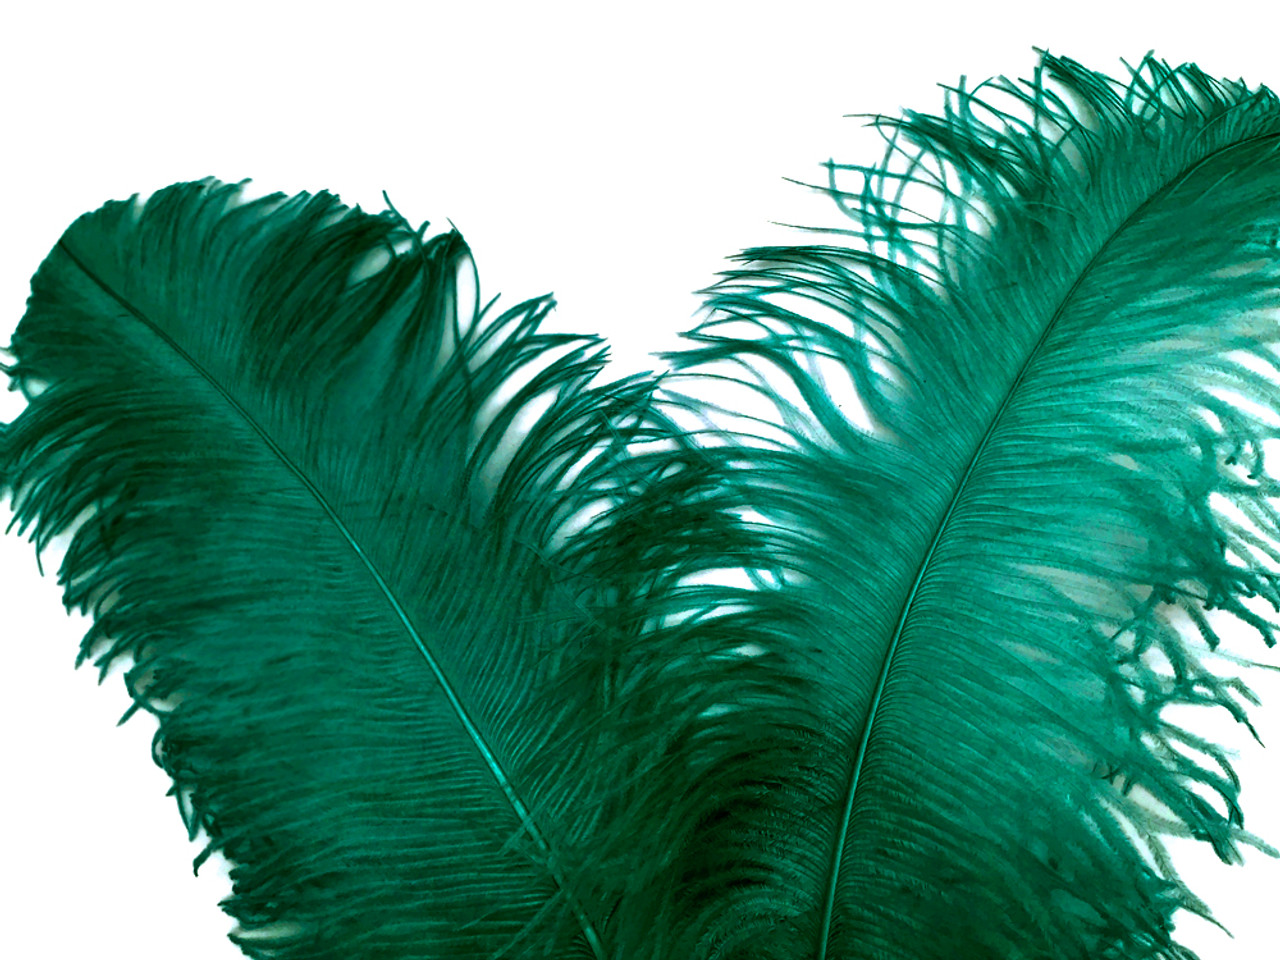 1/2 lb. - 18-24 Teal Green Large Wing Plumes Wholesale Feathers (bulk)